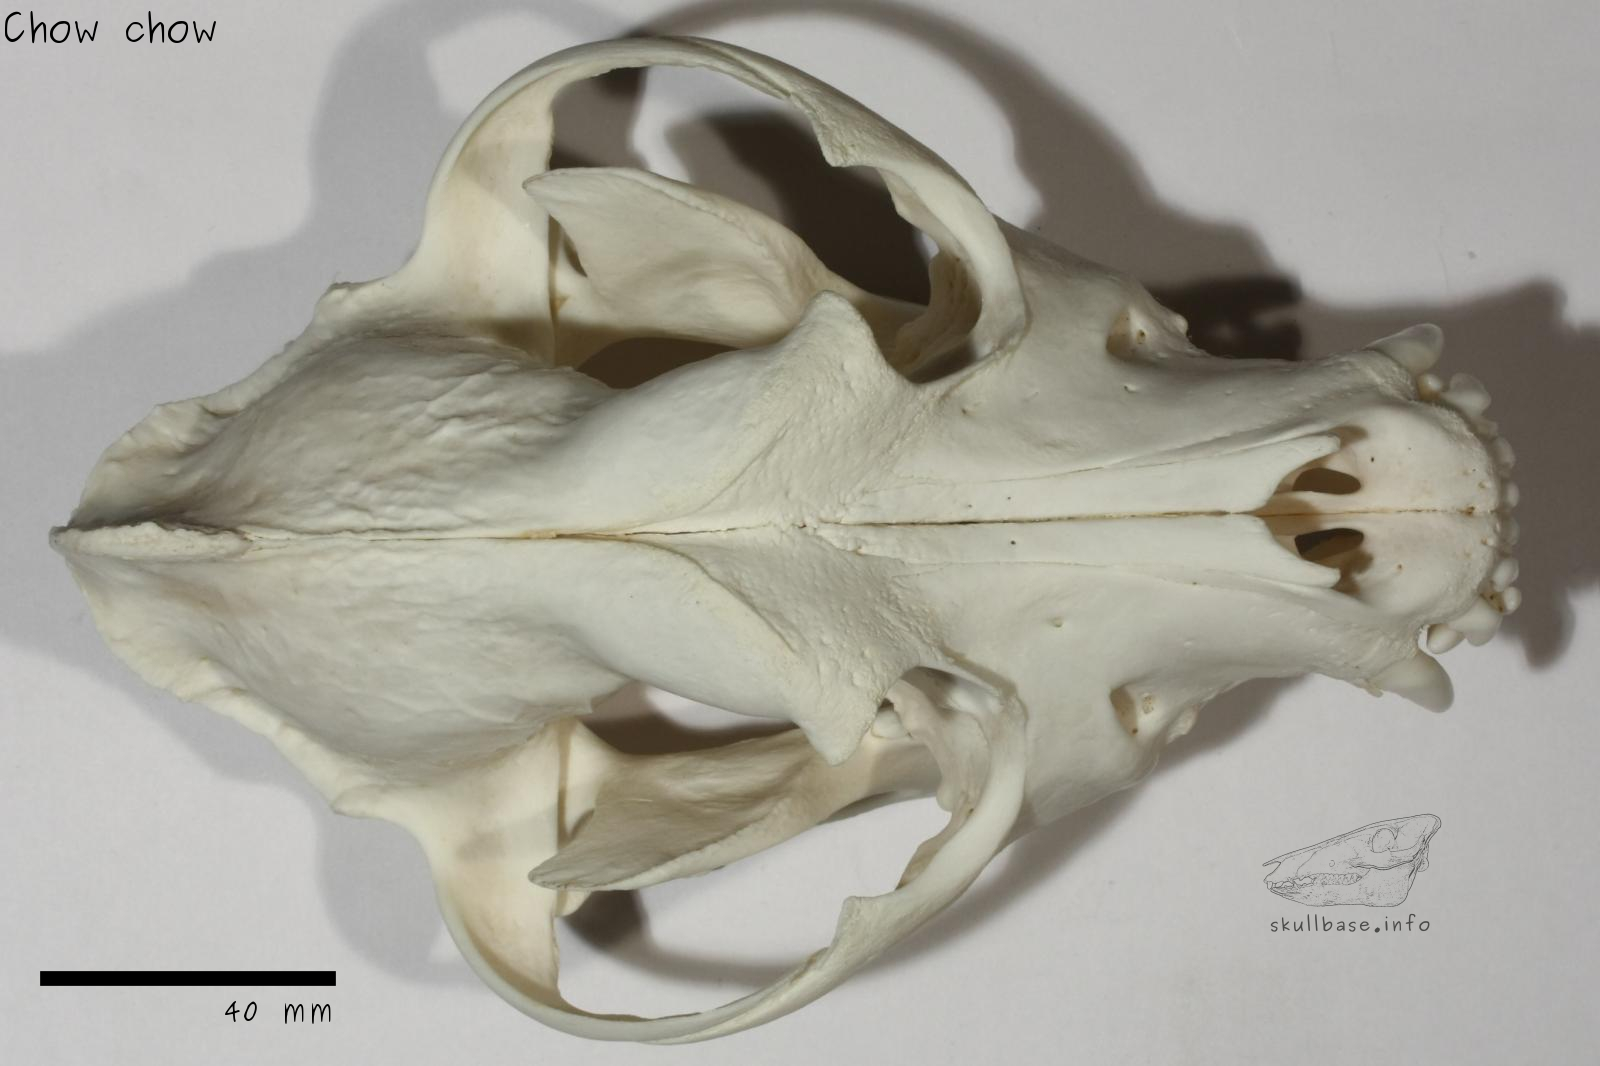 Chow chow (Canis lupus familiaris) skull dorsal view